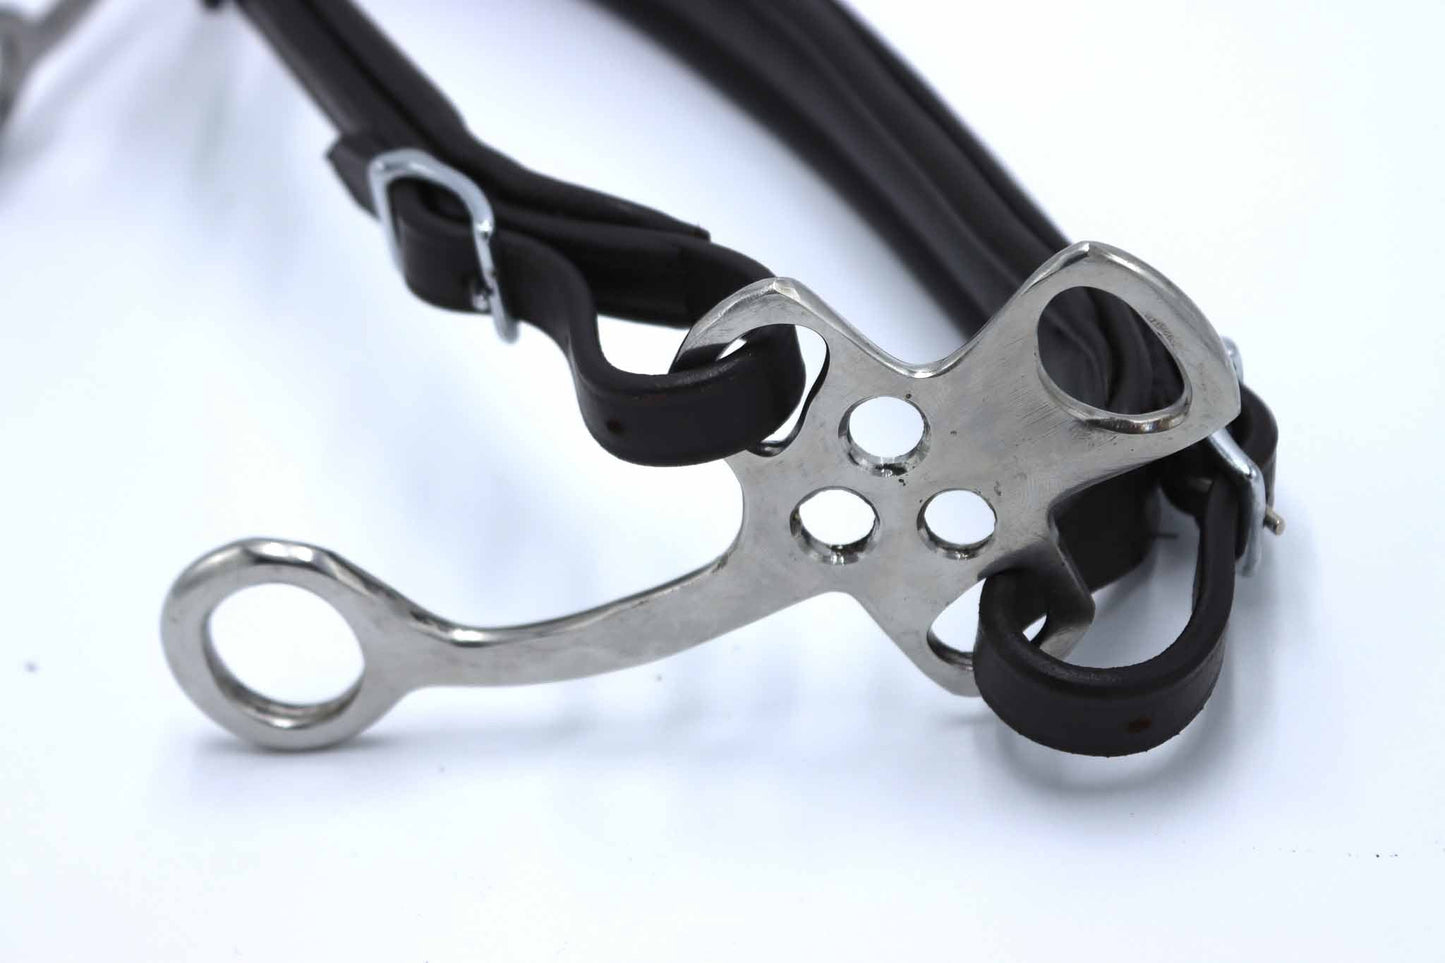 Hackamore Cuir branches Justin - F.R.A Freedom Riding Articles